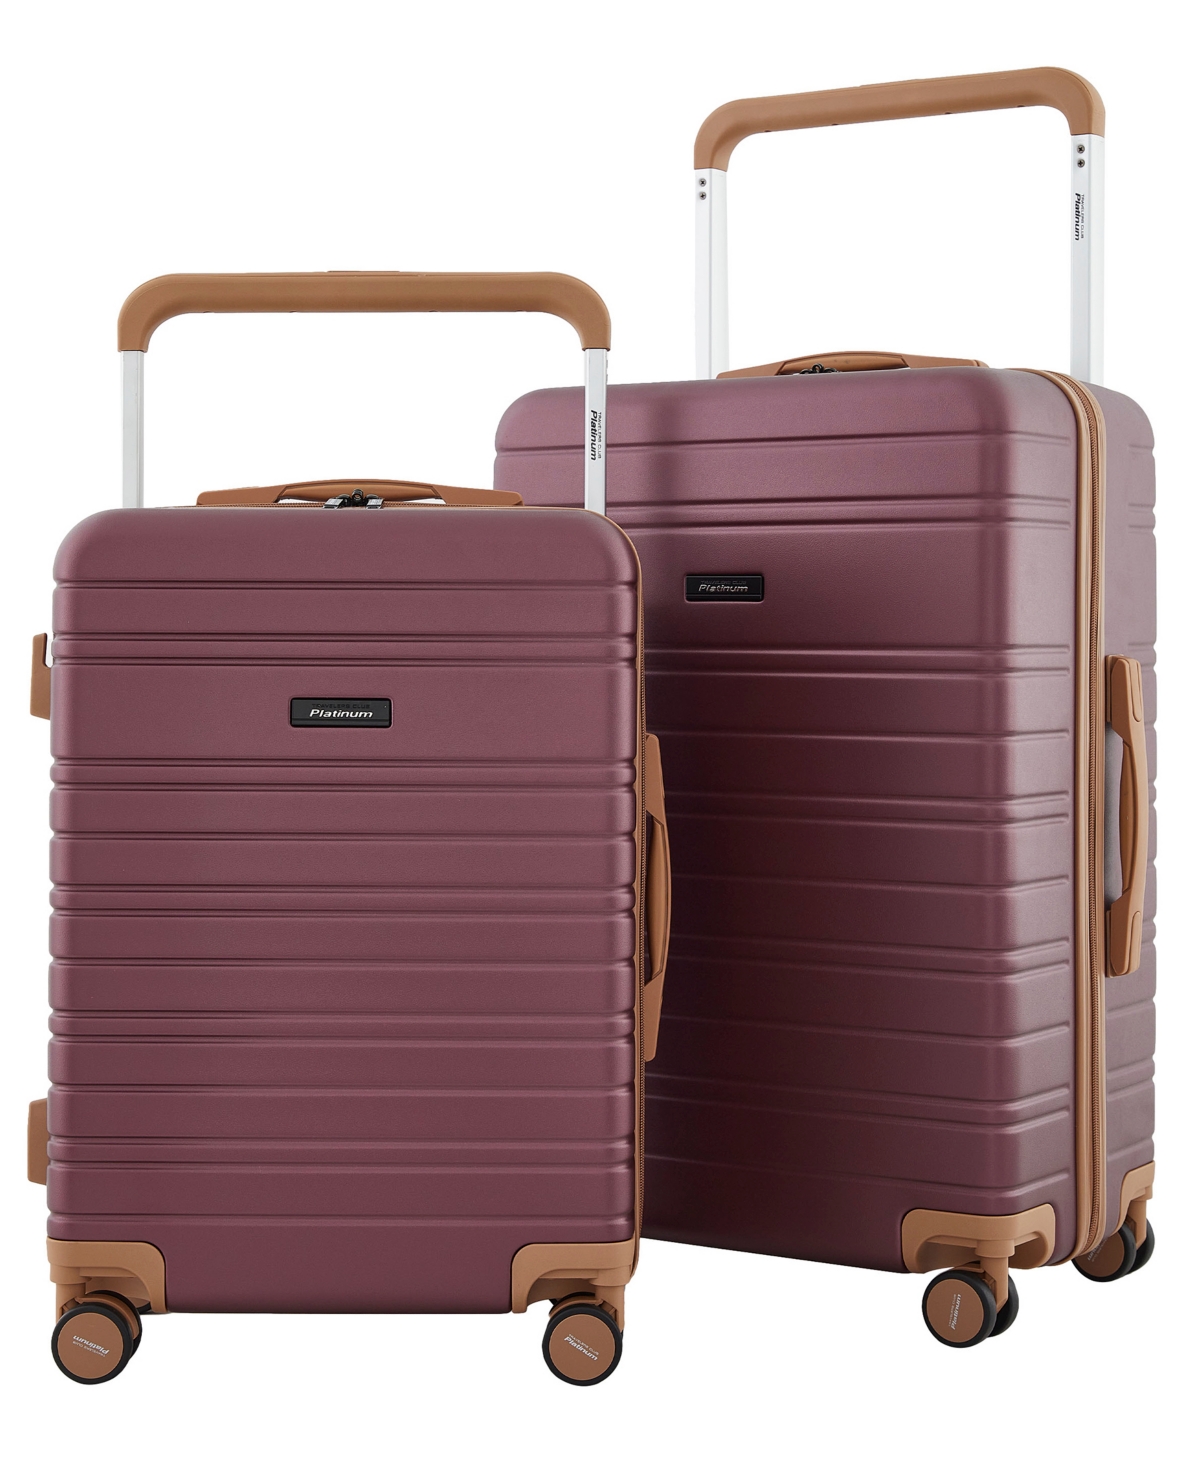 Navigate Collection 2 Piece Rolling Hard Case Luggage Set with X-Tra Wide Telescopic Handle - Burgundy